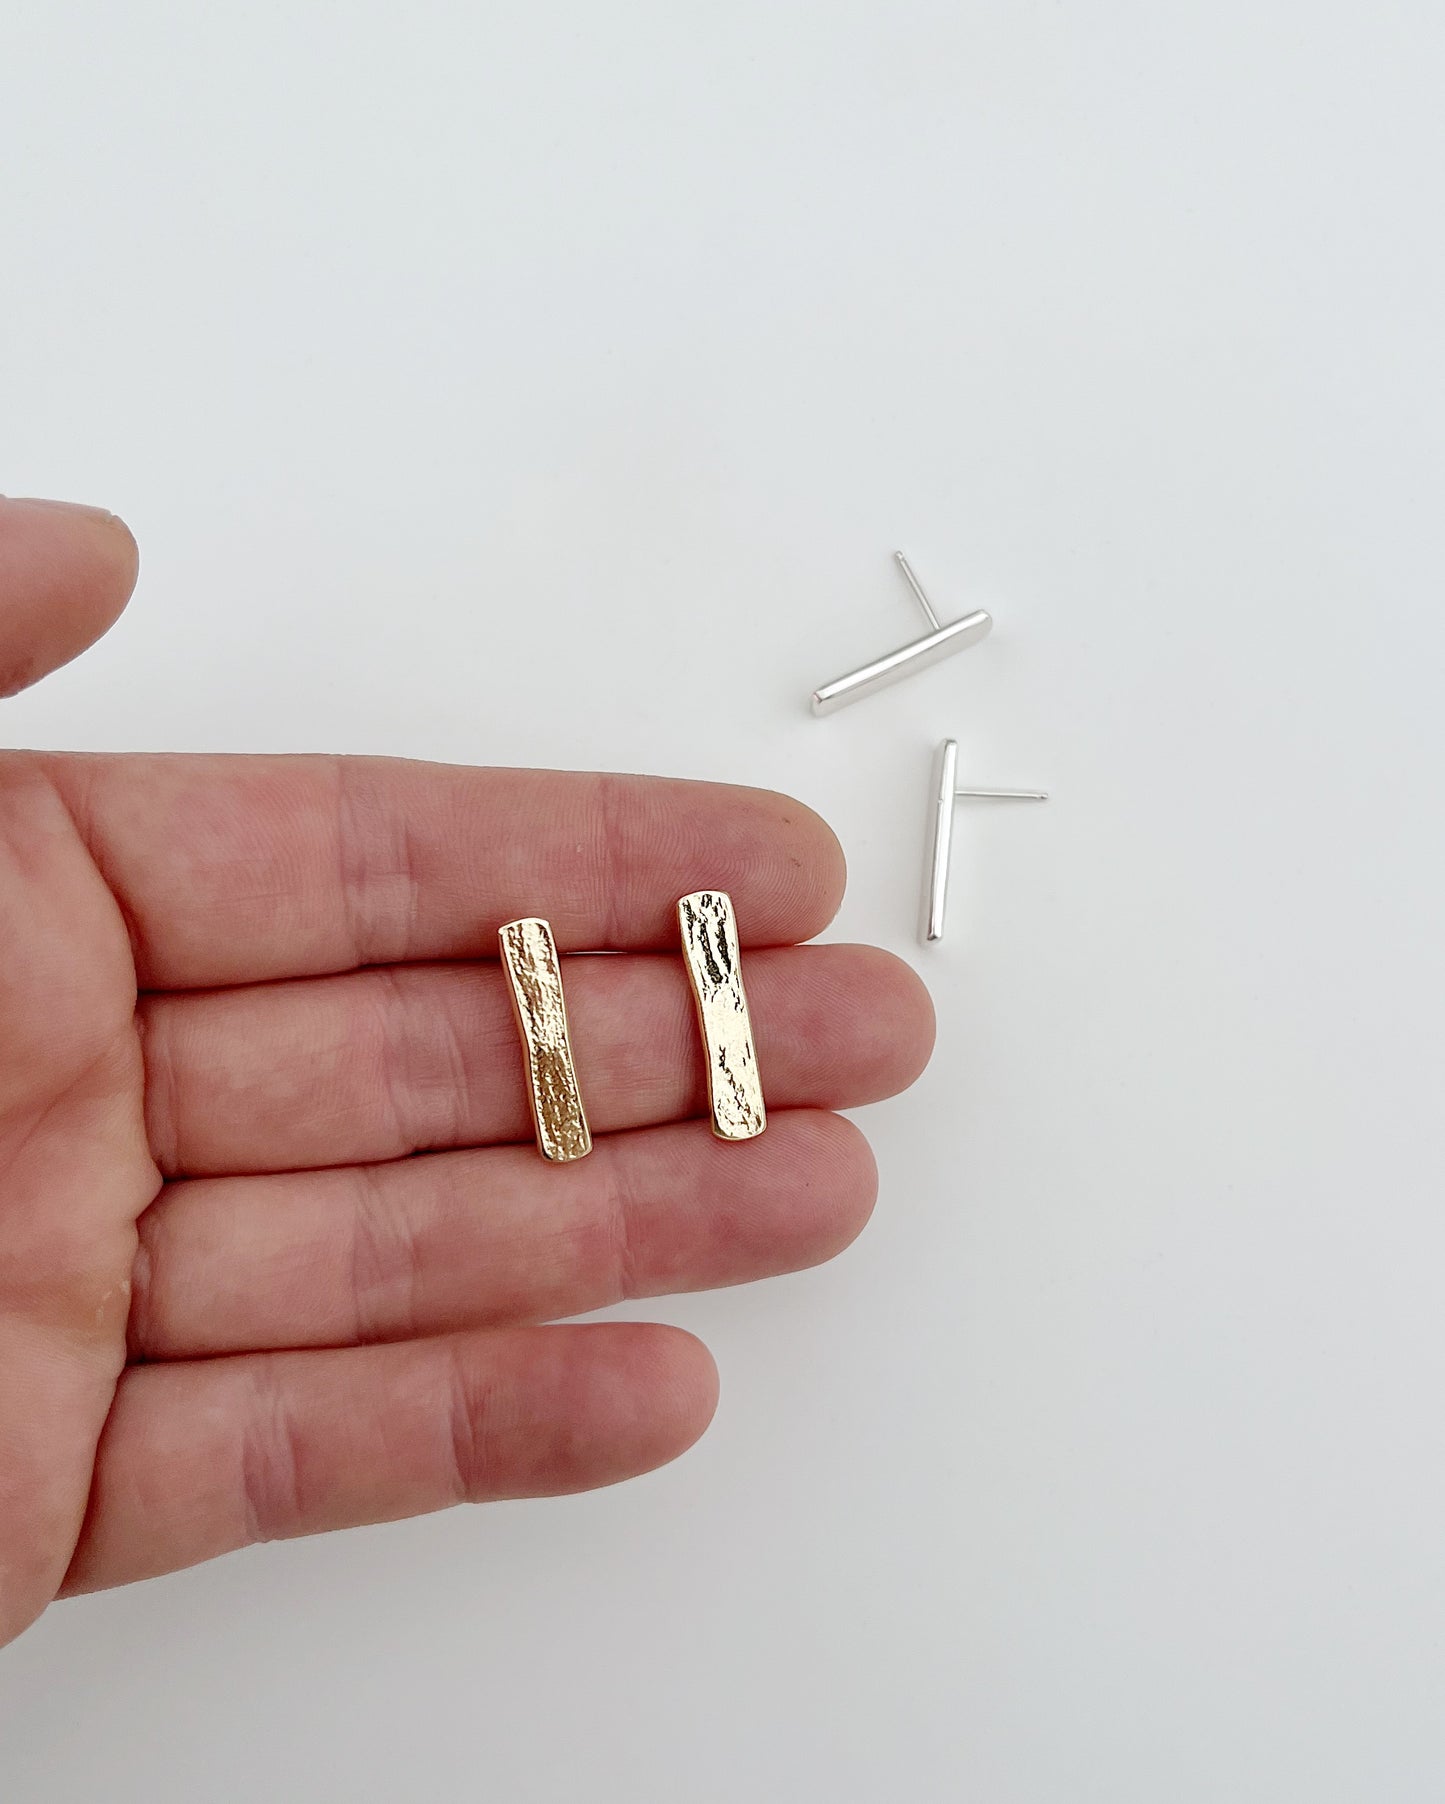 Miles and Miles earrings